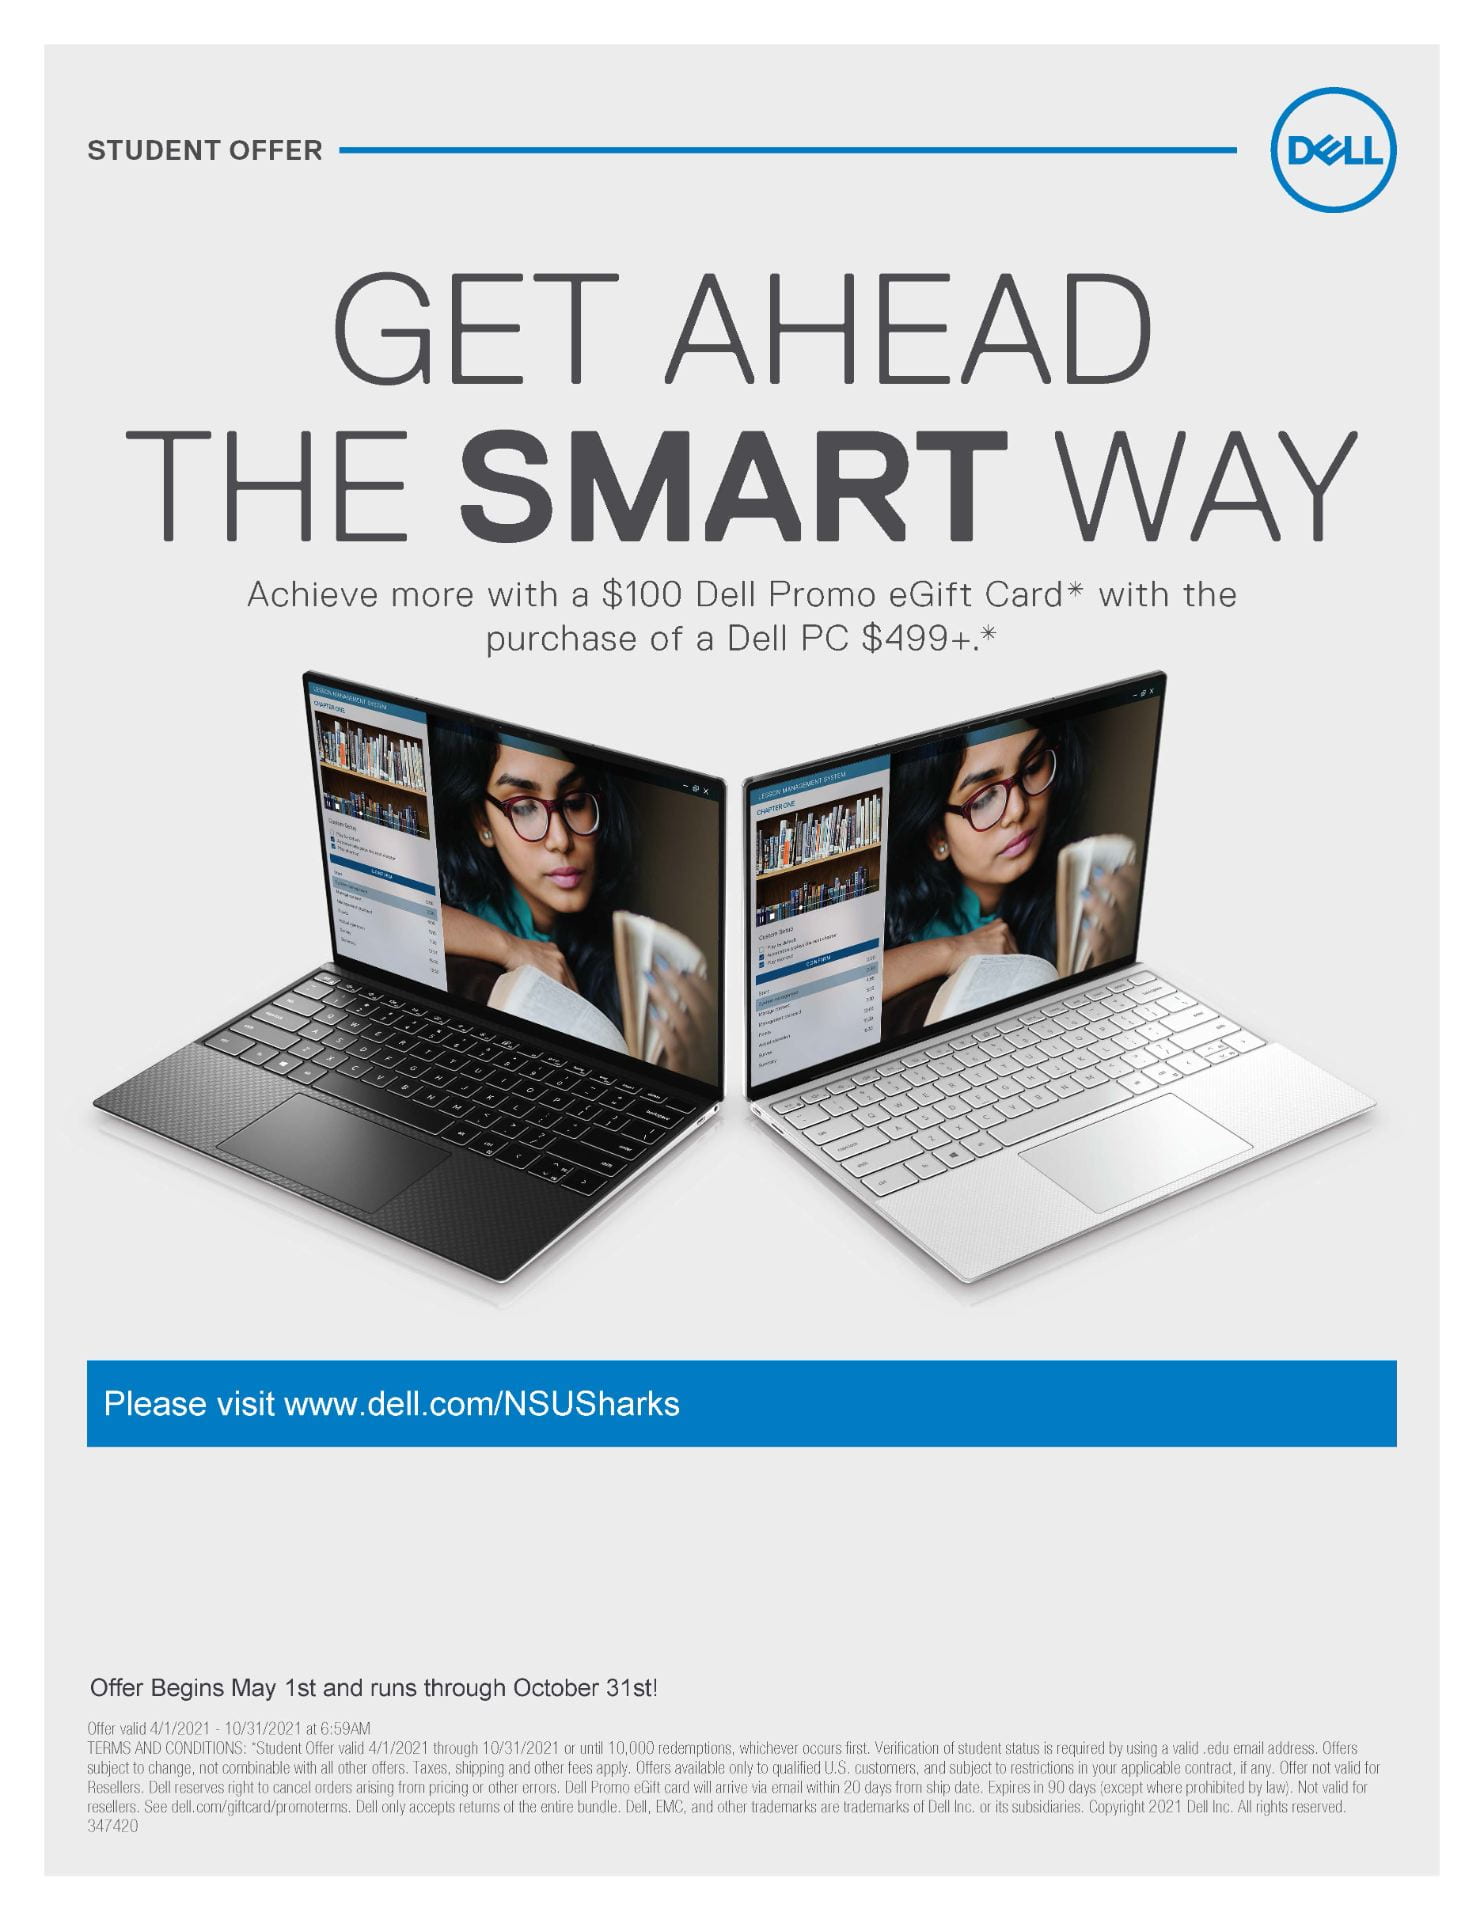 dell-student-offer-get-ahead-the-smart-way-nsu-sharkfins